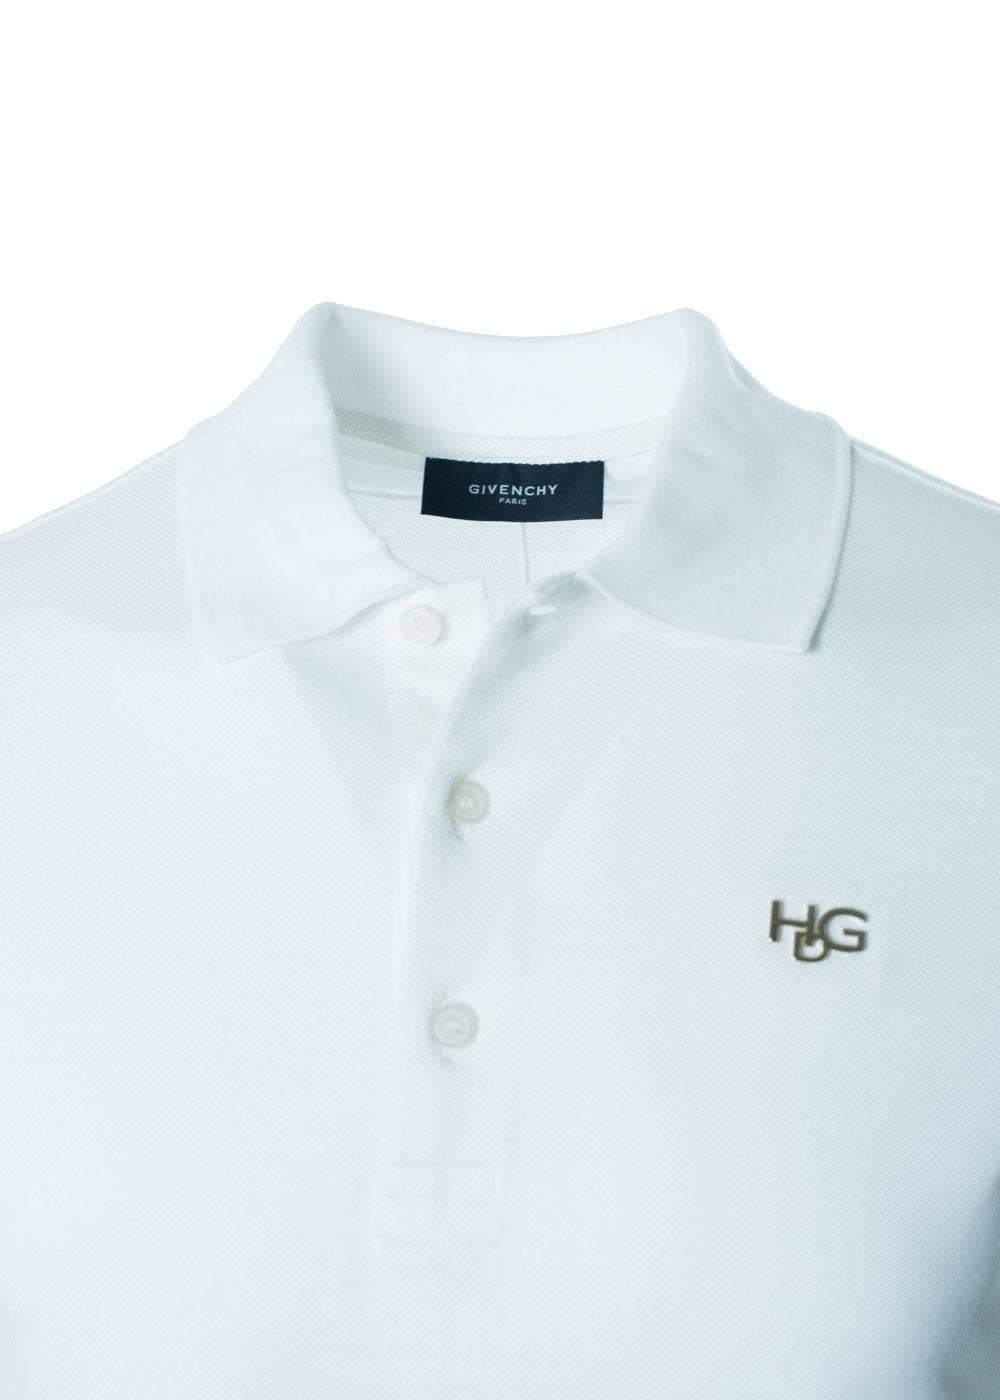 Brand New Givenchy Men's Polo
Original Tags
Retails in Stores & Online for $550
Men's Size X-Large Fits True to Size

Classic white polo shirt, versatile for any occasion and season especially this hot summer weather. This polo shirt has a silver